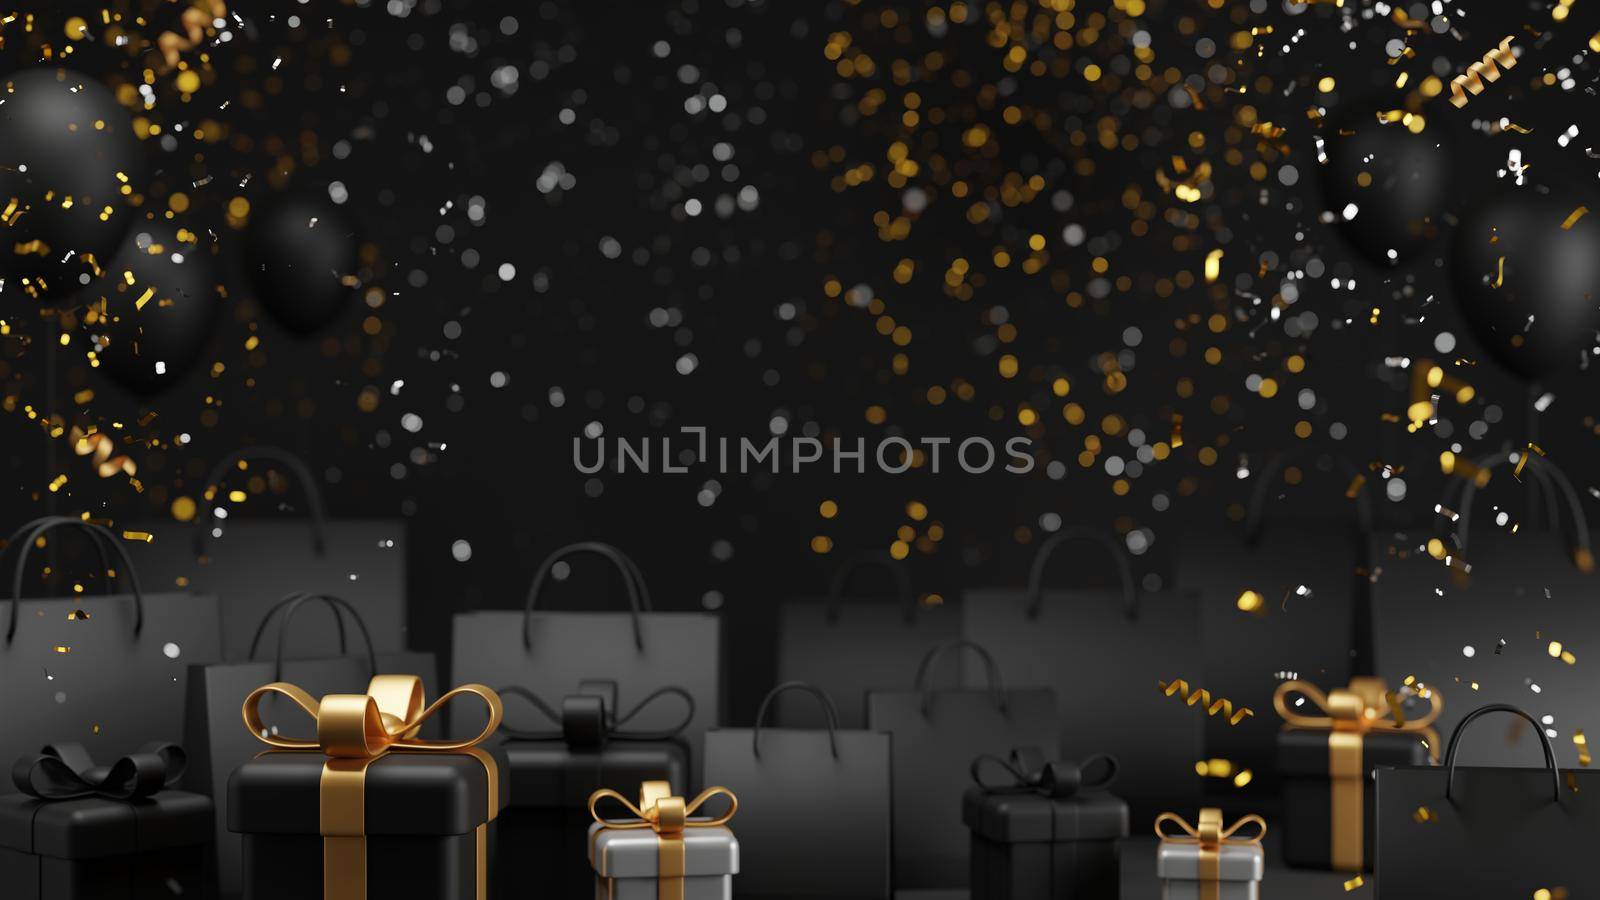 Black friday sale banner design of gift box and shopping bag with confetti falling 3d render